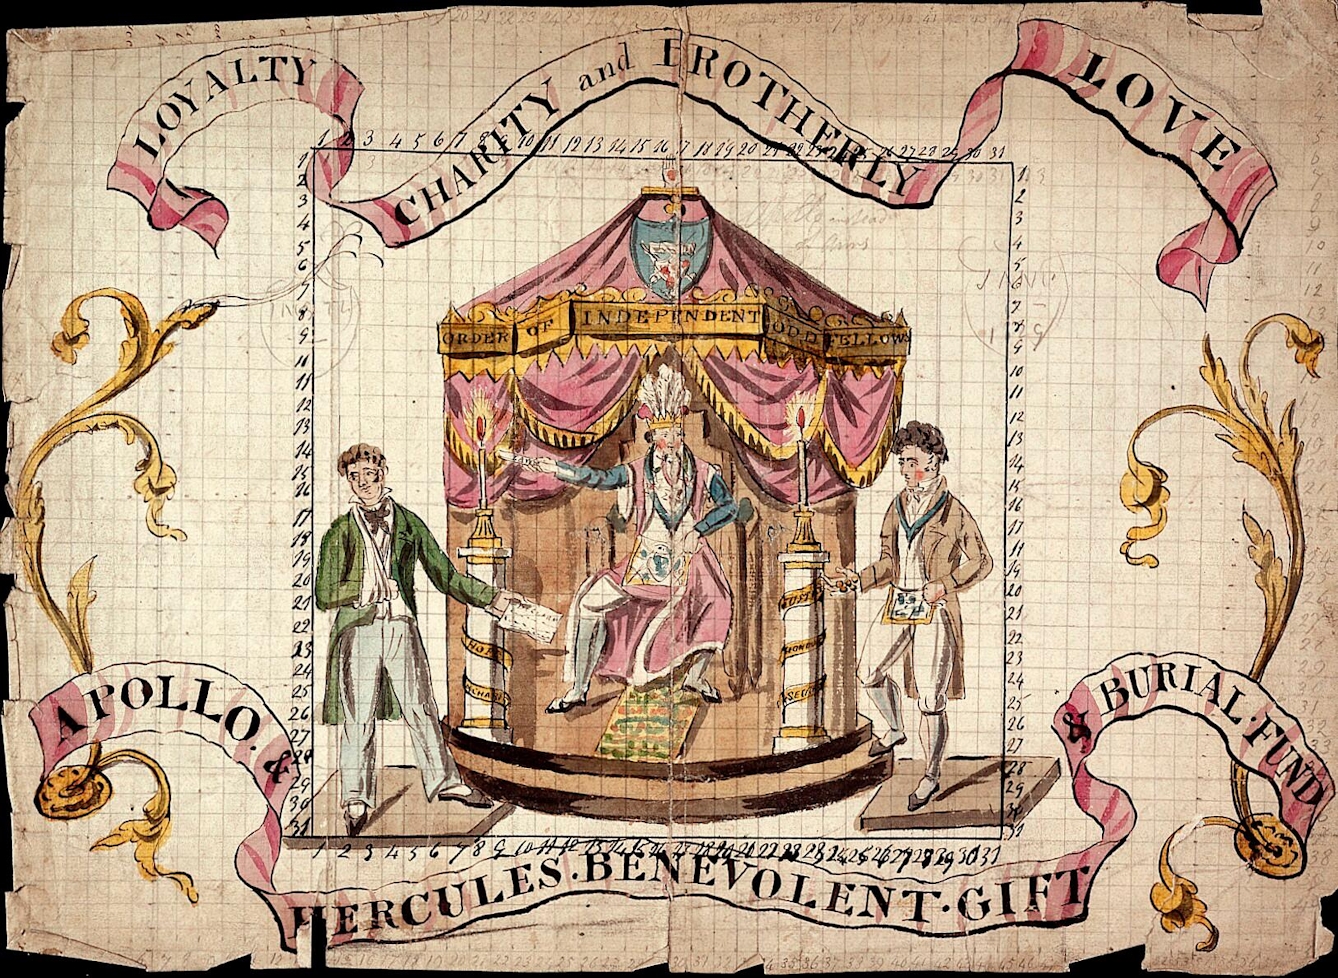 The president of the Apollo & Hercules Benvolent Gift and Burial Fund sits on a throne. On the left, a man with his arm in a sling presents a document (presumably a request for compensation). On the right an officer of the Order offers some gold coins.  The watercolour is presented in the form of a coat of arms, embellished with decorative scrolls and a banner above the central theme giving the values of the society: loyalty, charity and brotherly love and one below giving the name of the fund. 